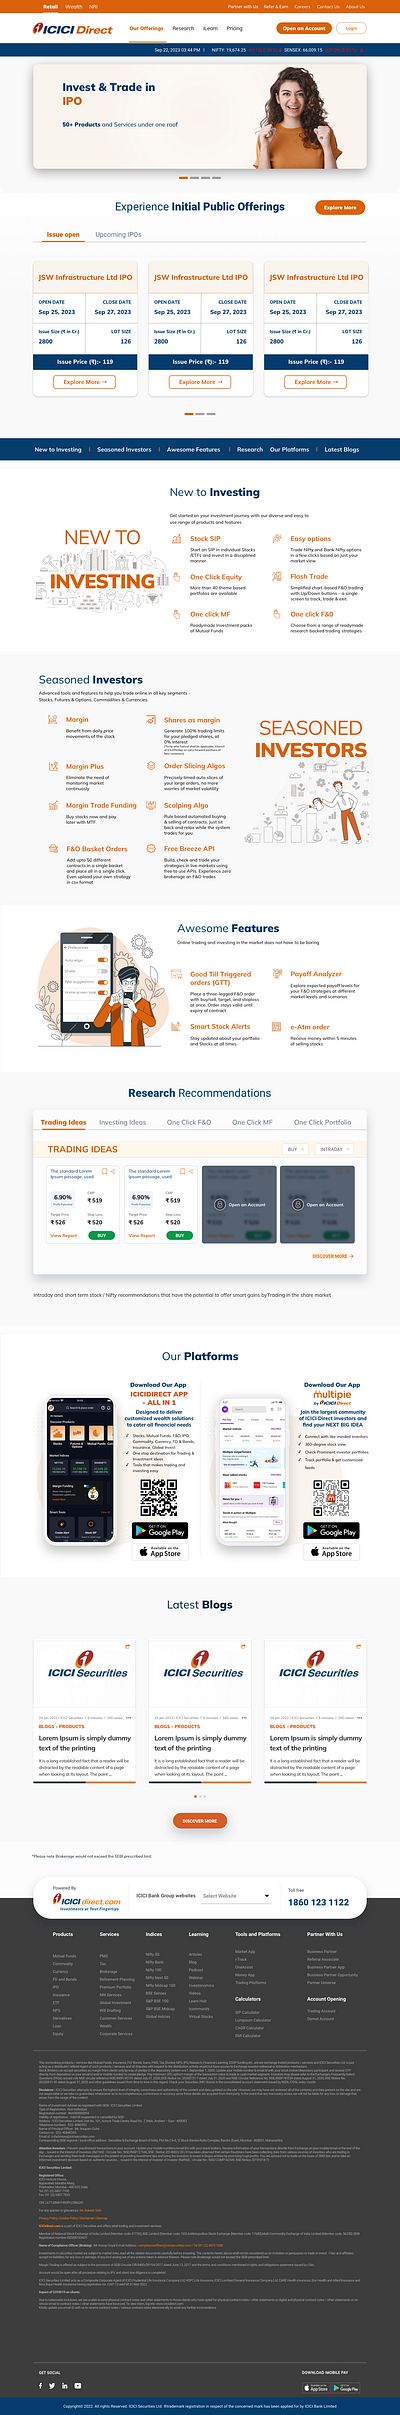 ICICI Direct Home Page IPO Customer home page landing page ui user interface design